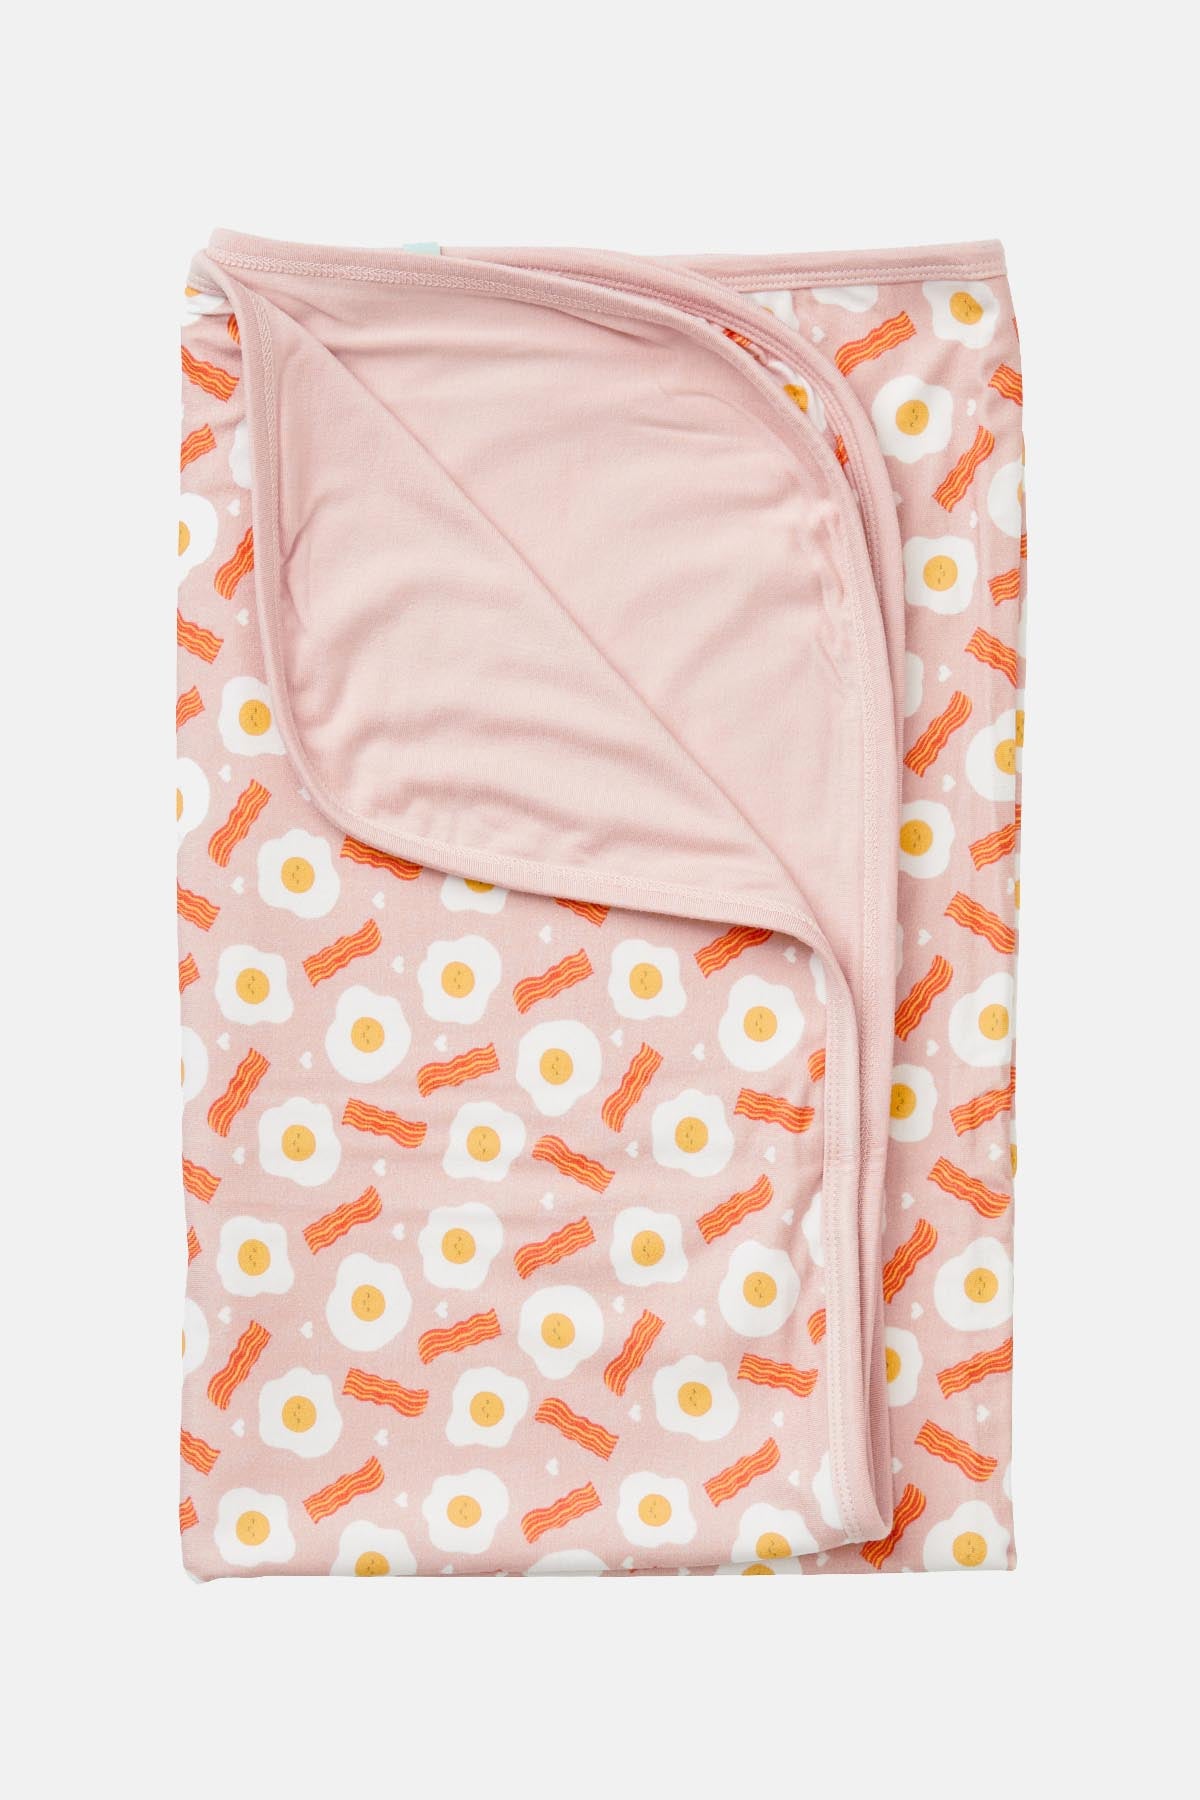 Stretchy Oversized Blanket - Bacon &amp; Eggs Pink